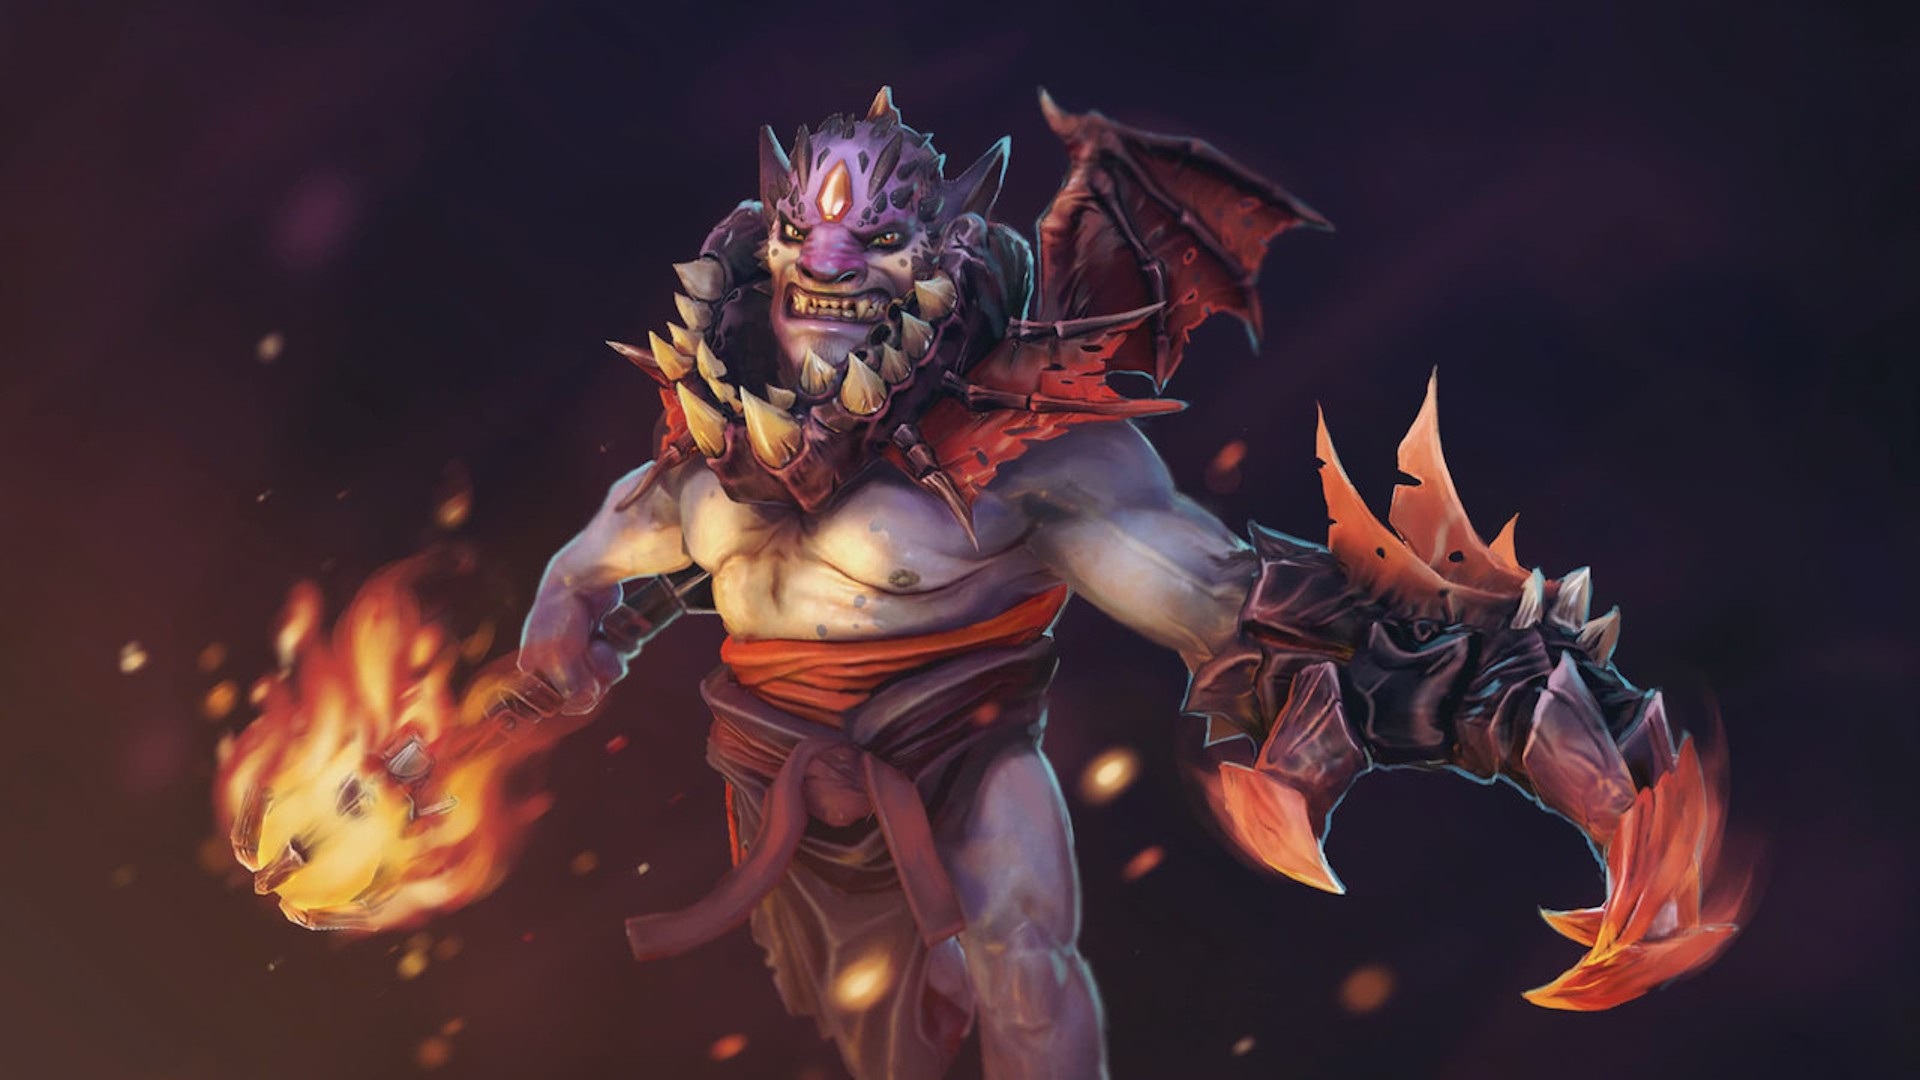 ranks: ranking system explained, MMR, and | The Loadout